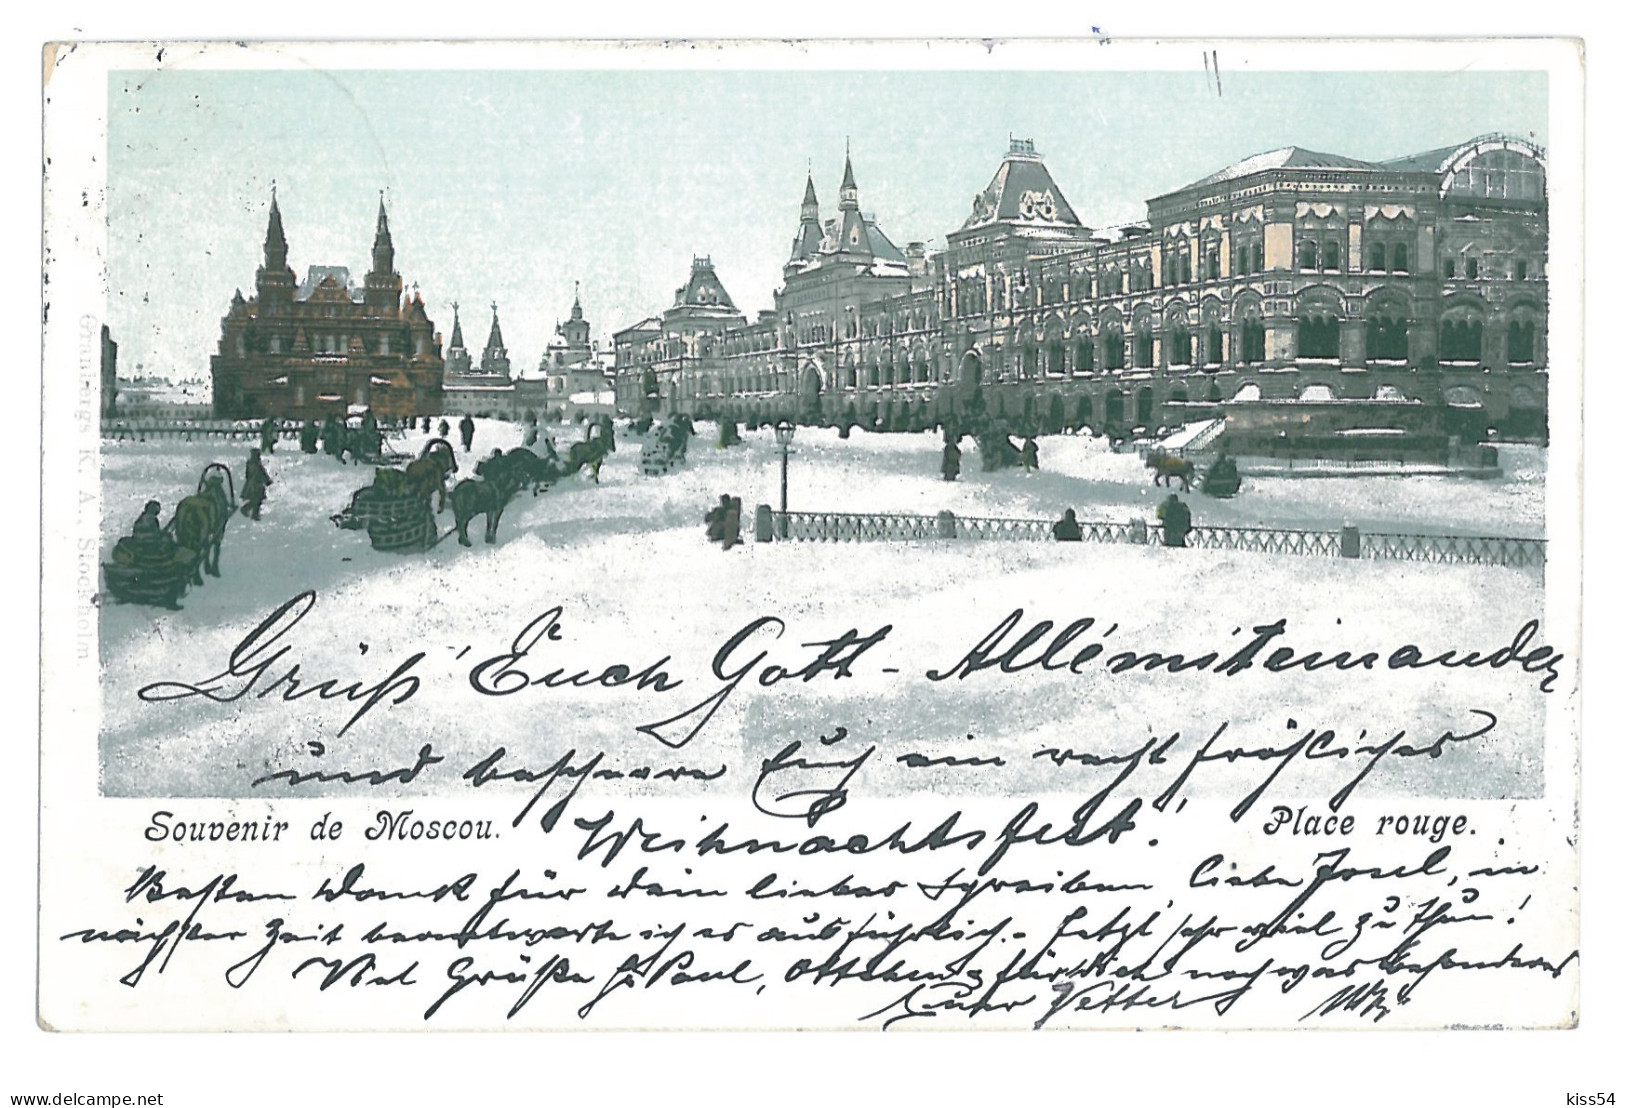 RUS 60 - 13862 MOSCOW, Russia, Litho, Red Market - Old Postcard - Used - 1900 - Russland